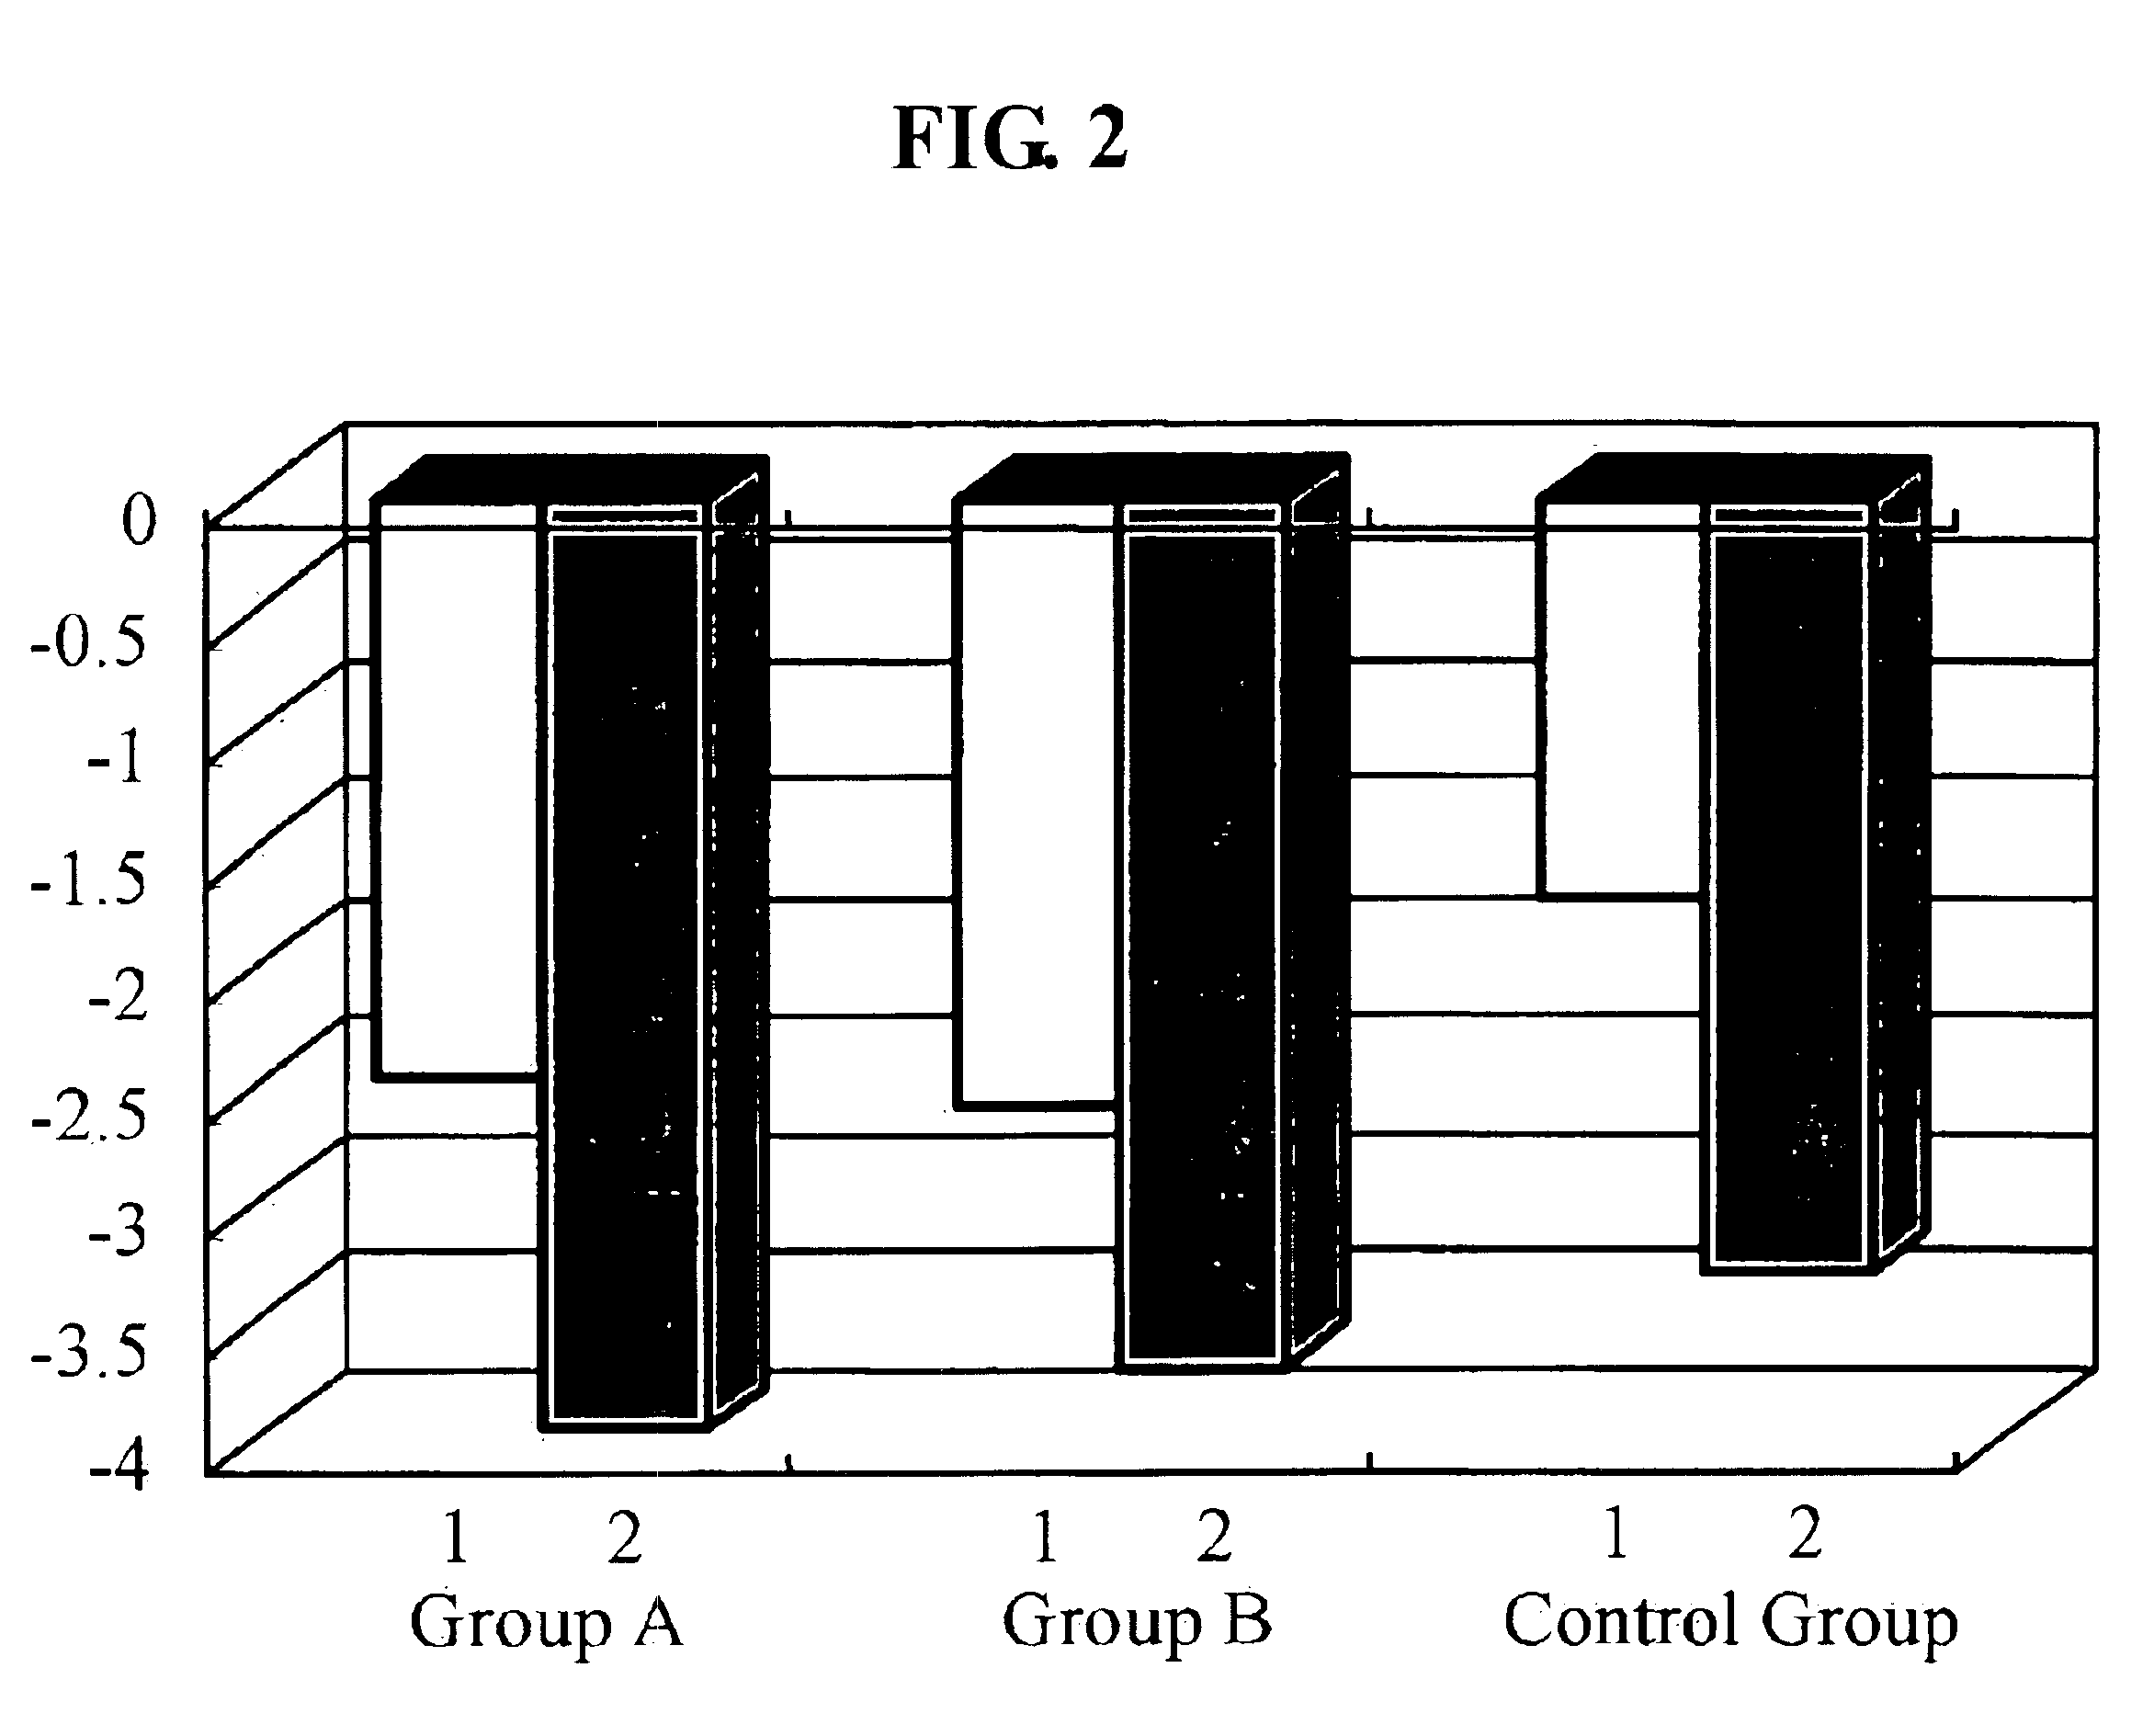 Diet composition comprising raw foods and dietary fibers